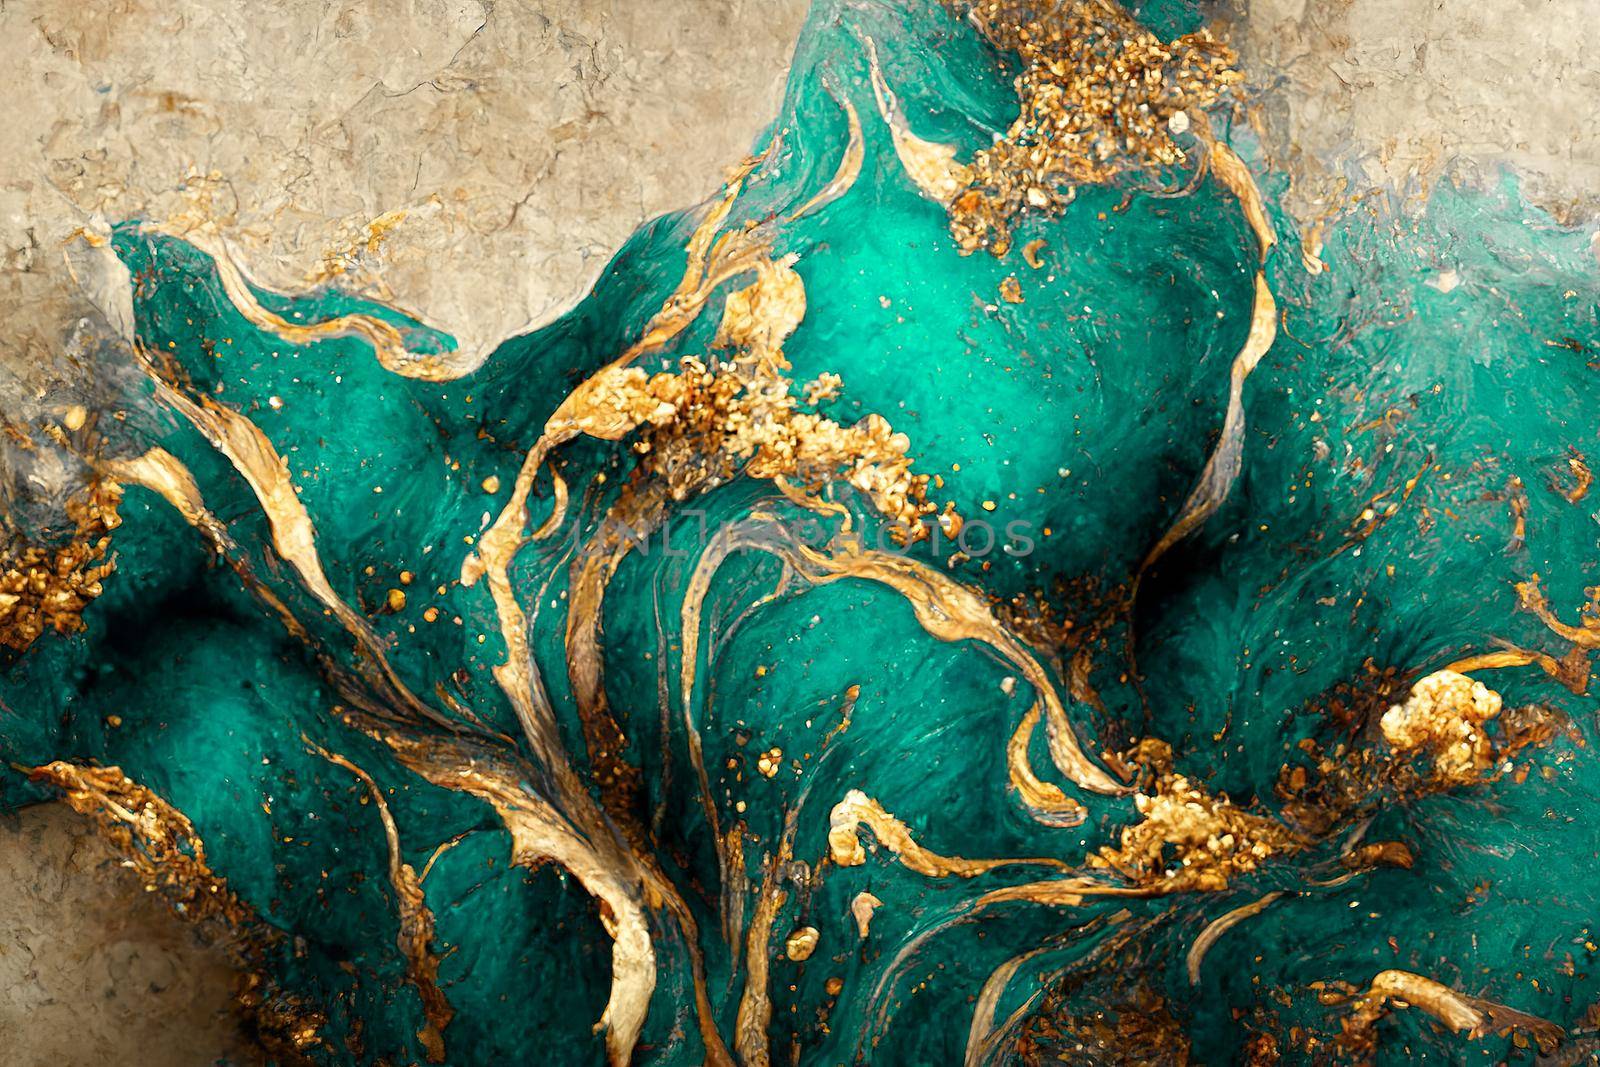 Spectacular dark teal and gold ink swirled around. Digital art 3D illustration. by biancoblue